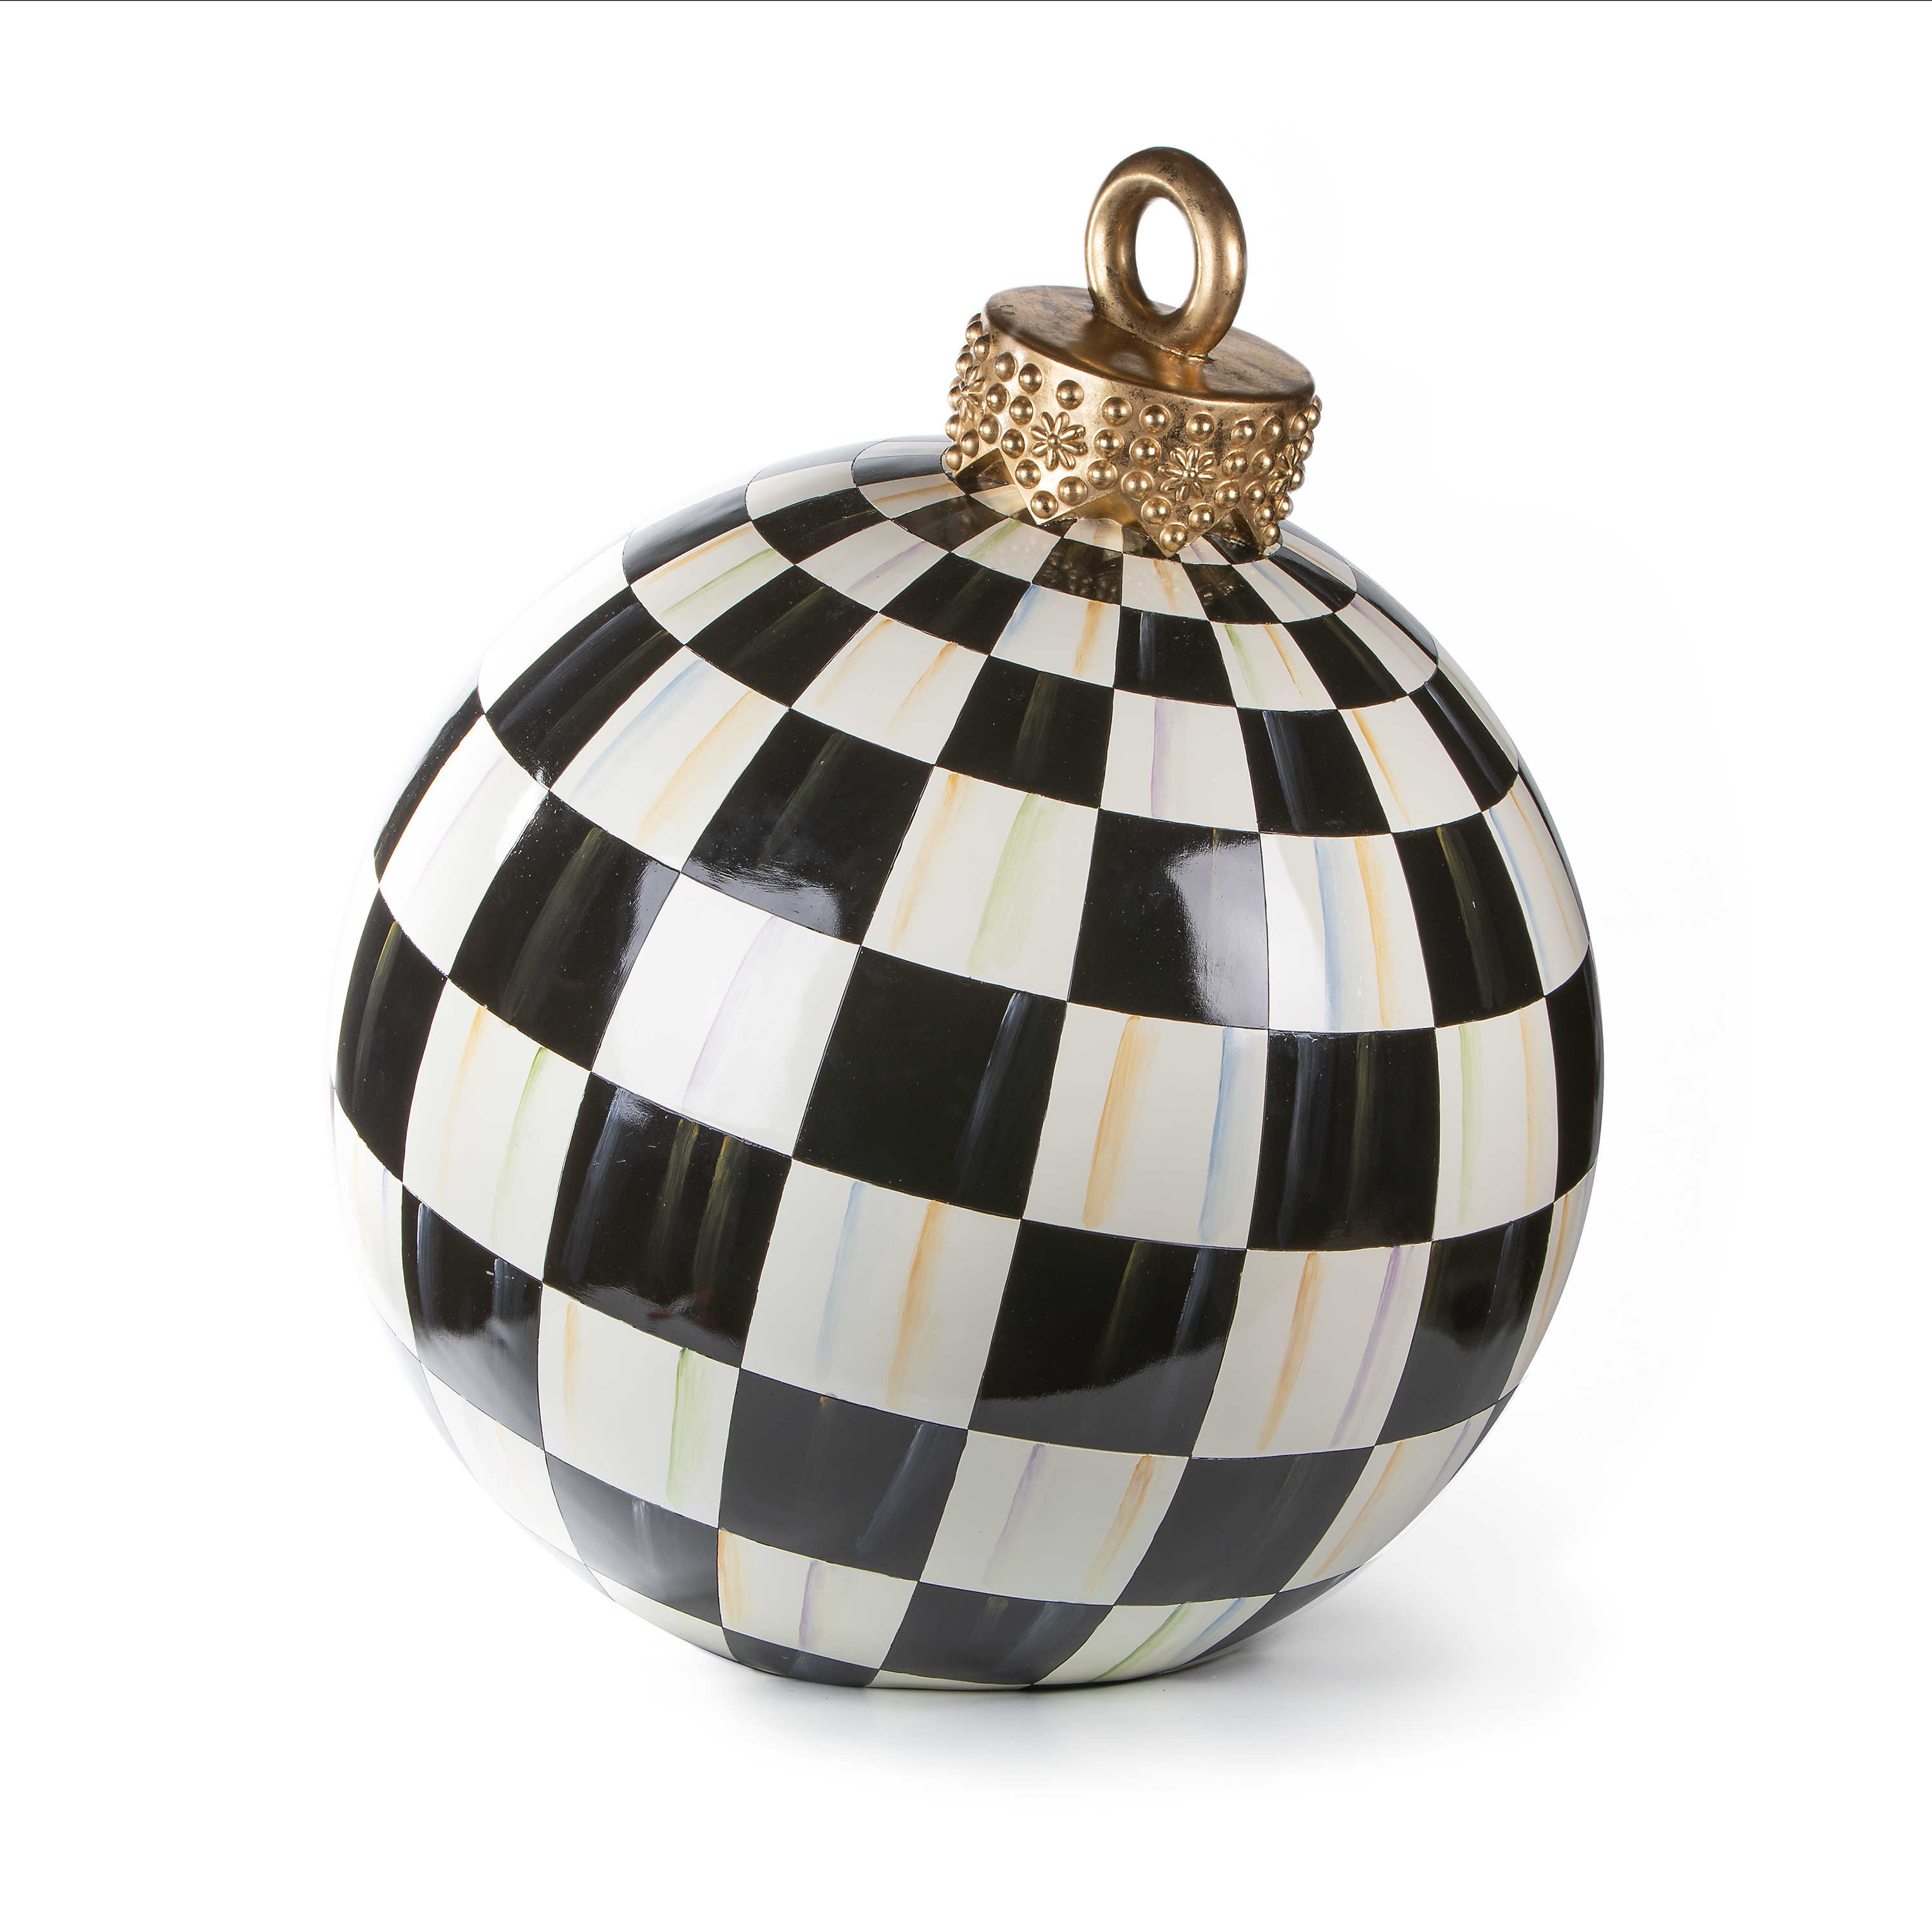 Jolly Outdoor Ornament - Courtly Check mackenzie-childs Panama 0